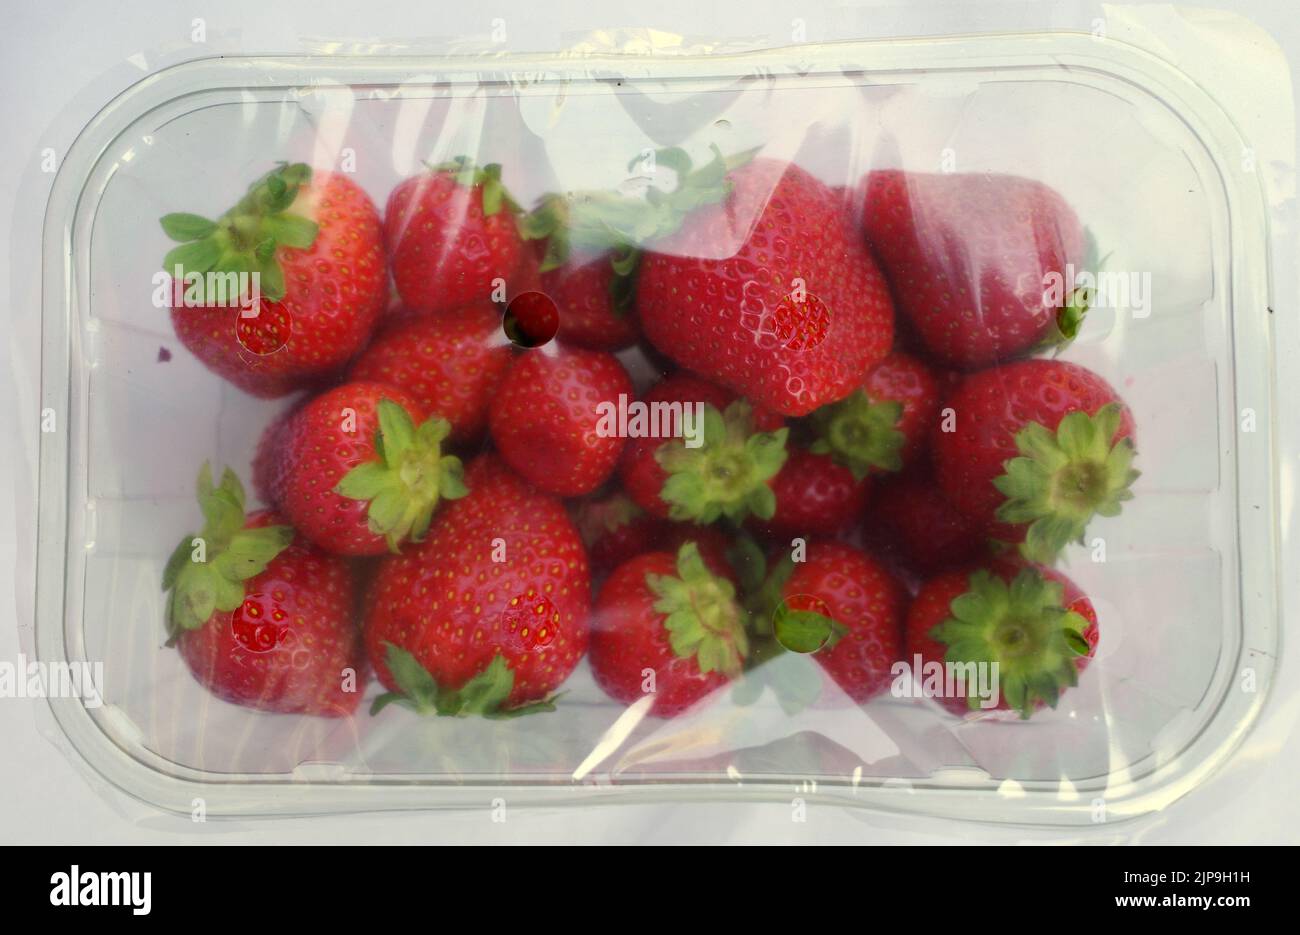 Strawberries in a sealed plastic box. Supermarket packaging. Too much plastic waste is produced. Stock Photo